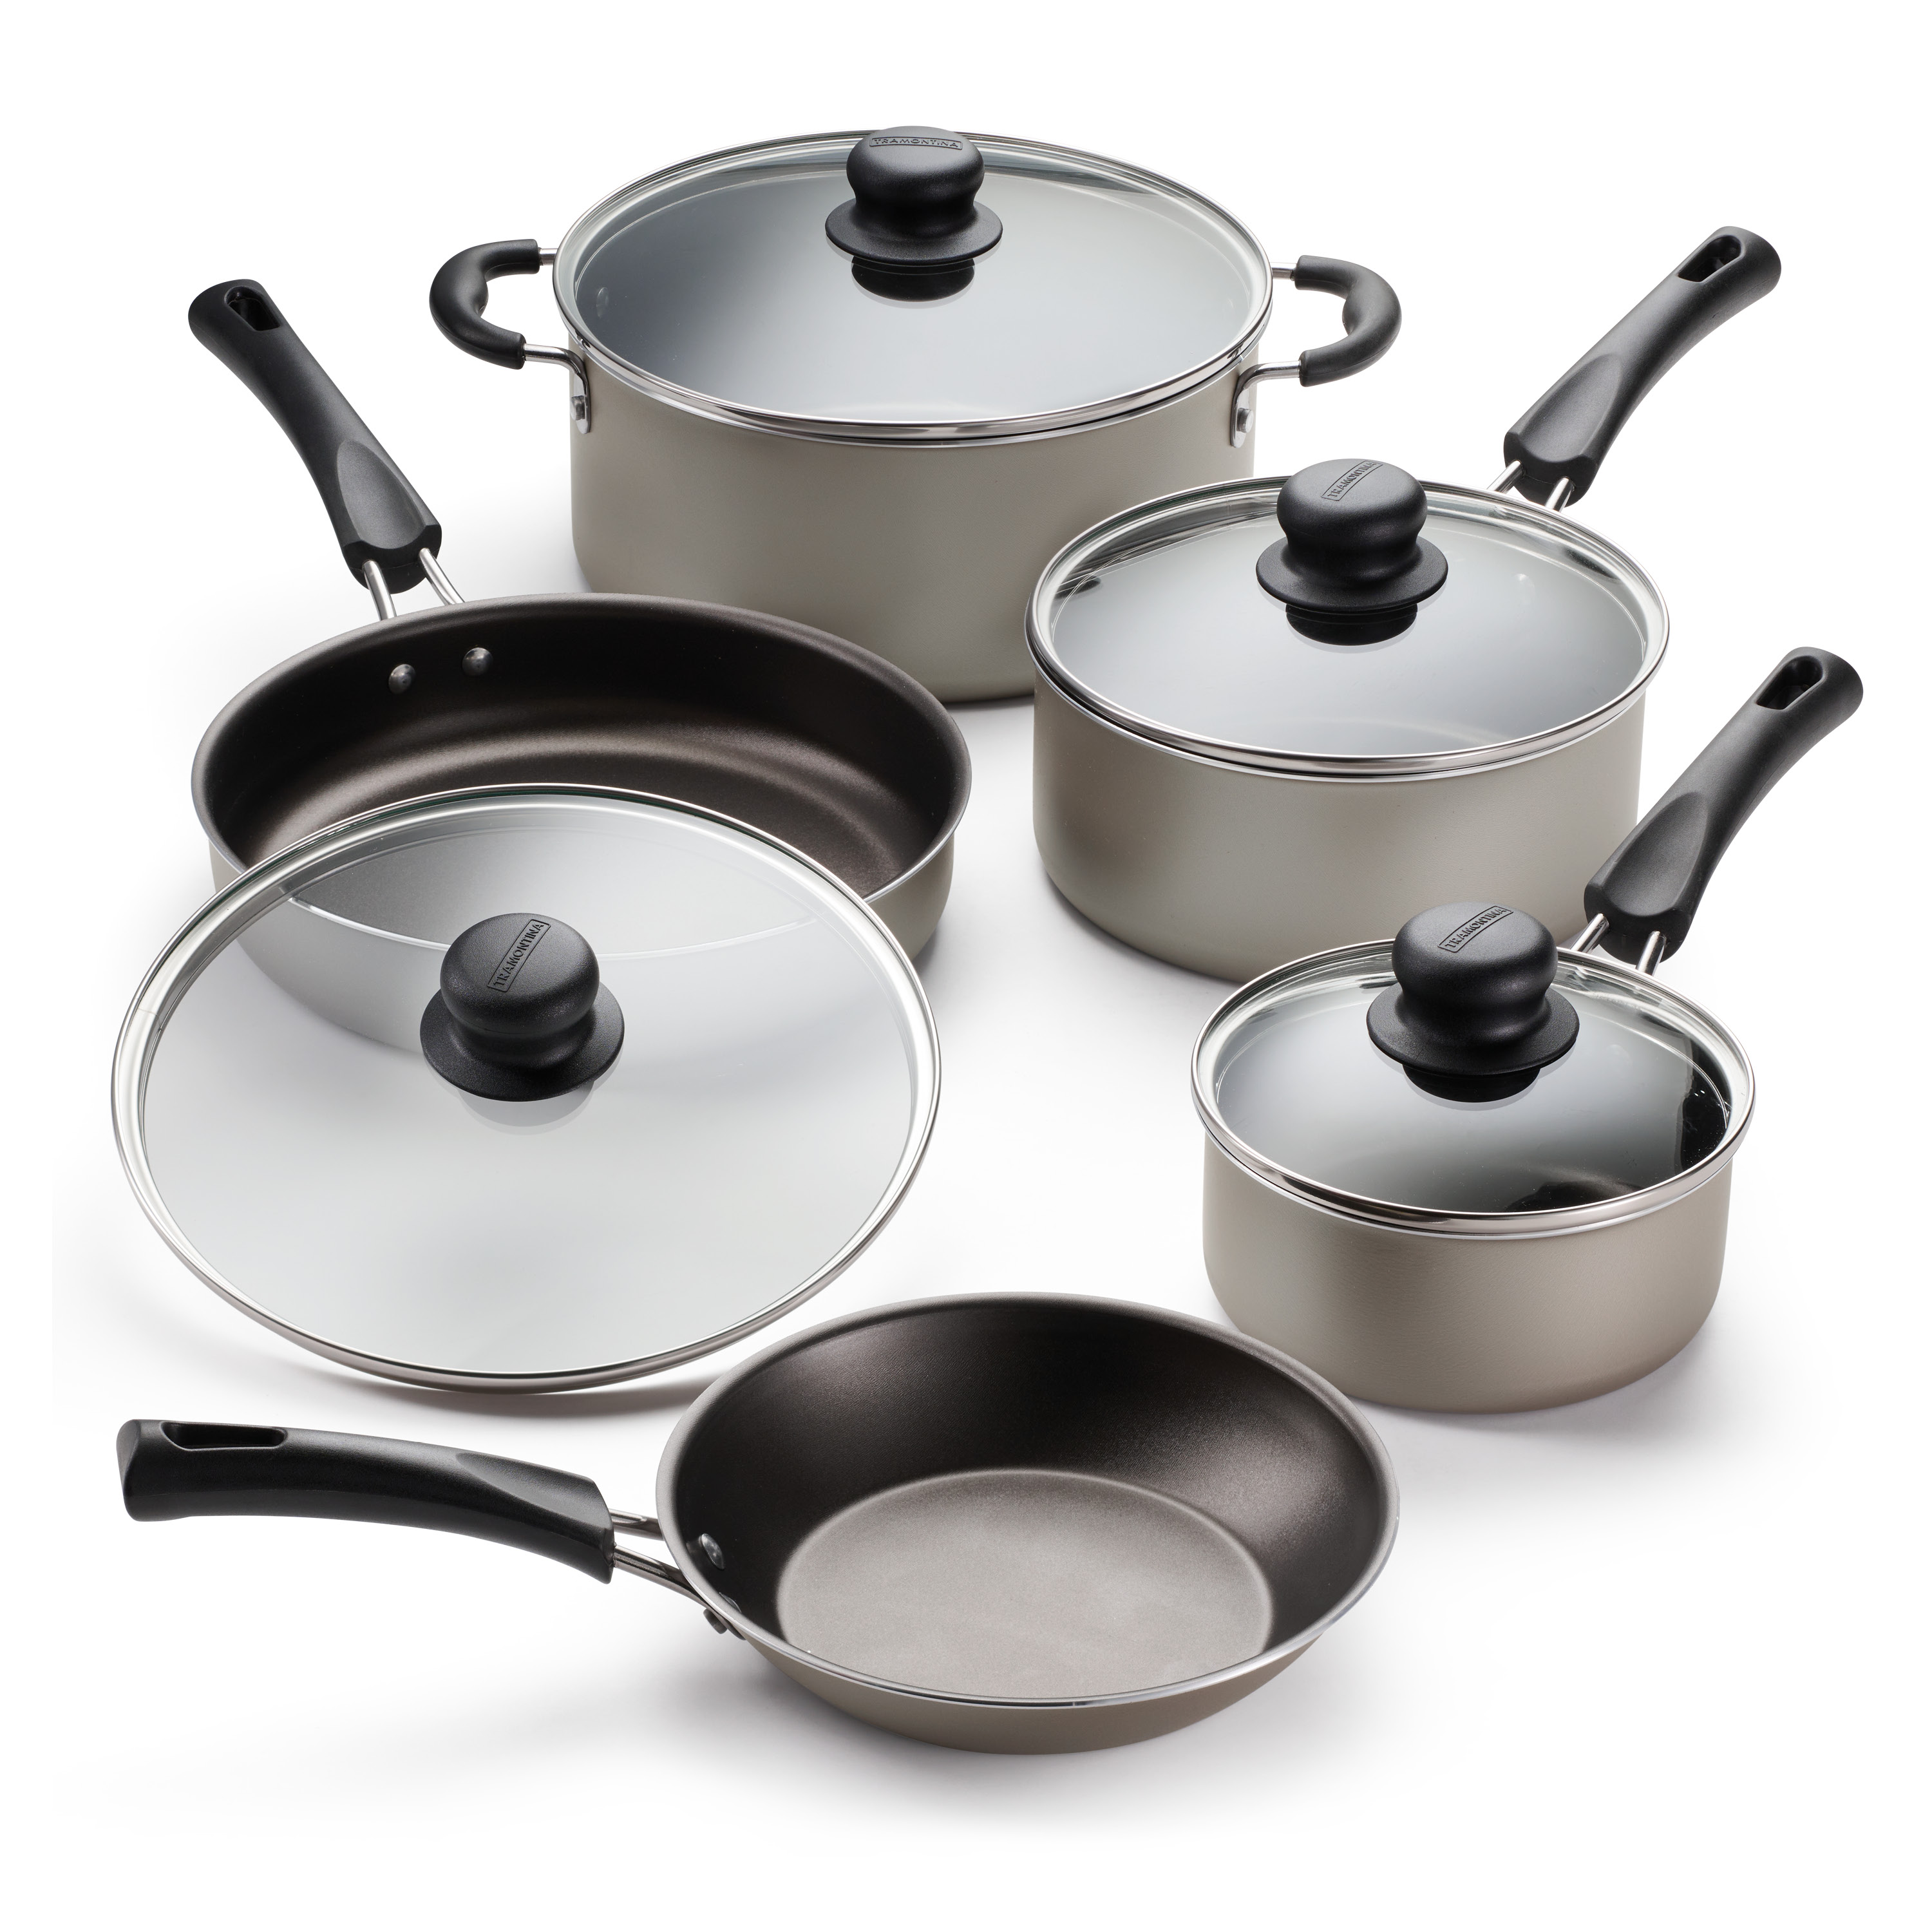 Tramontina 9-Piece Non-Stick Cookware Set, Champagne - image 1 of 21